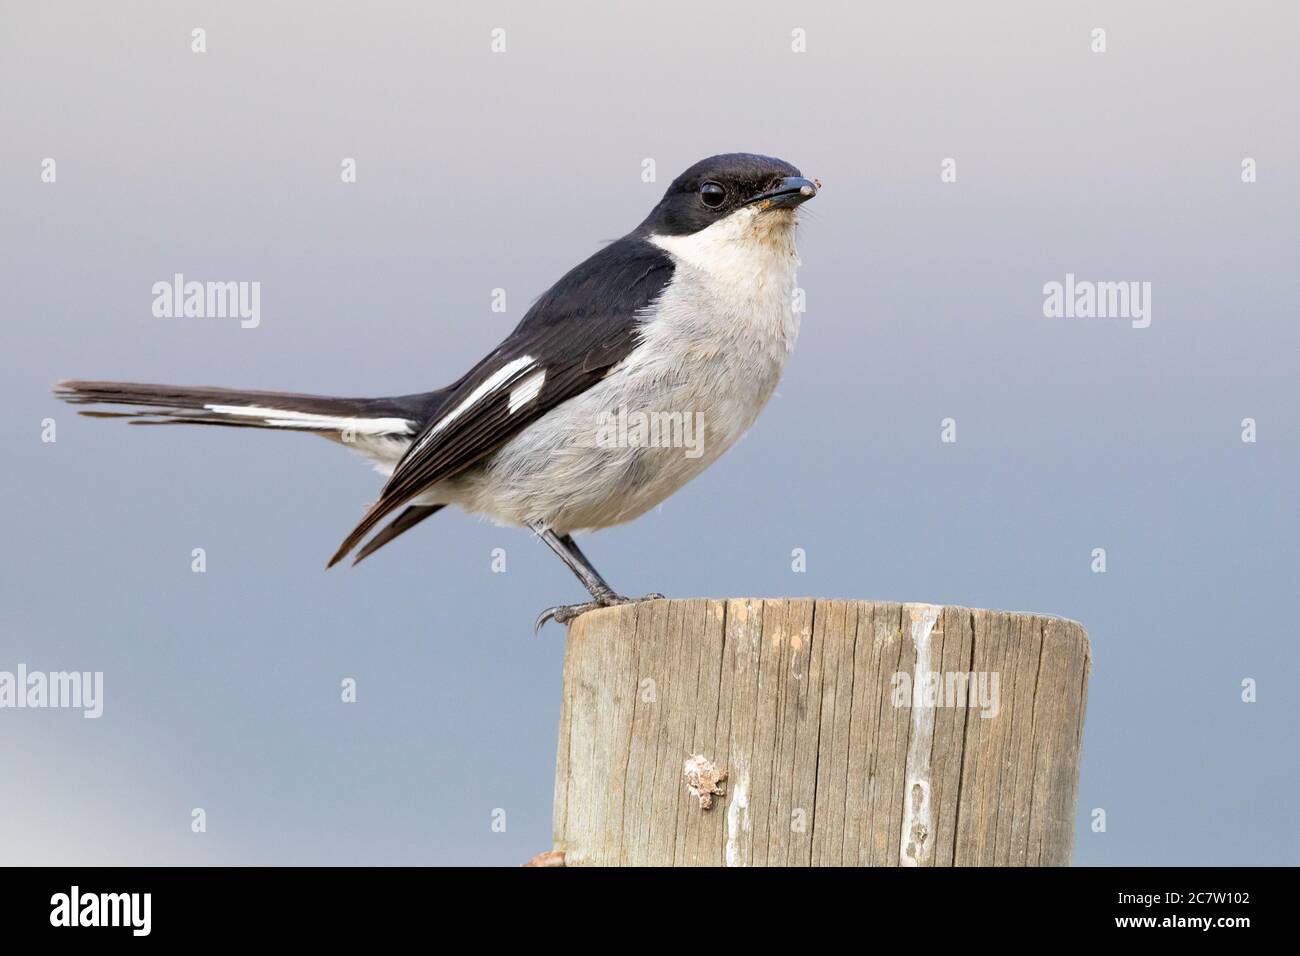 Fiscal Flycatcher (Melaenornis silens), side view of an adult male standing on a post, Western Cape, South Africa Stock Photo